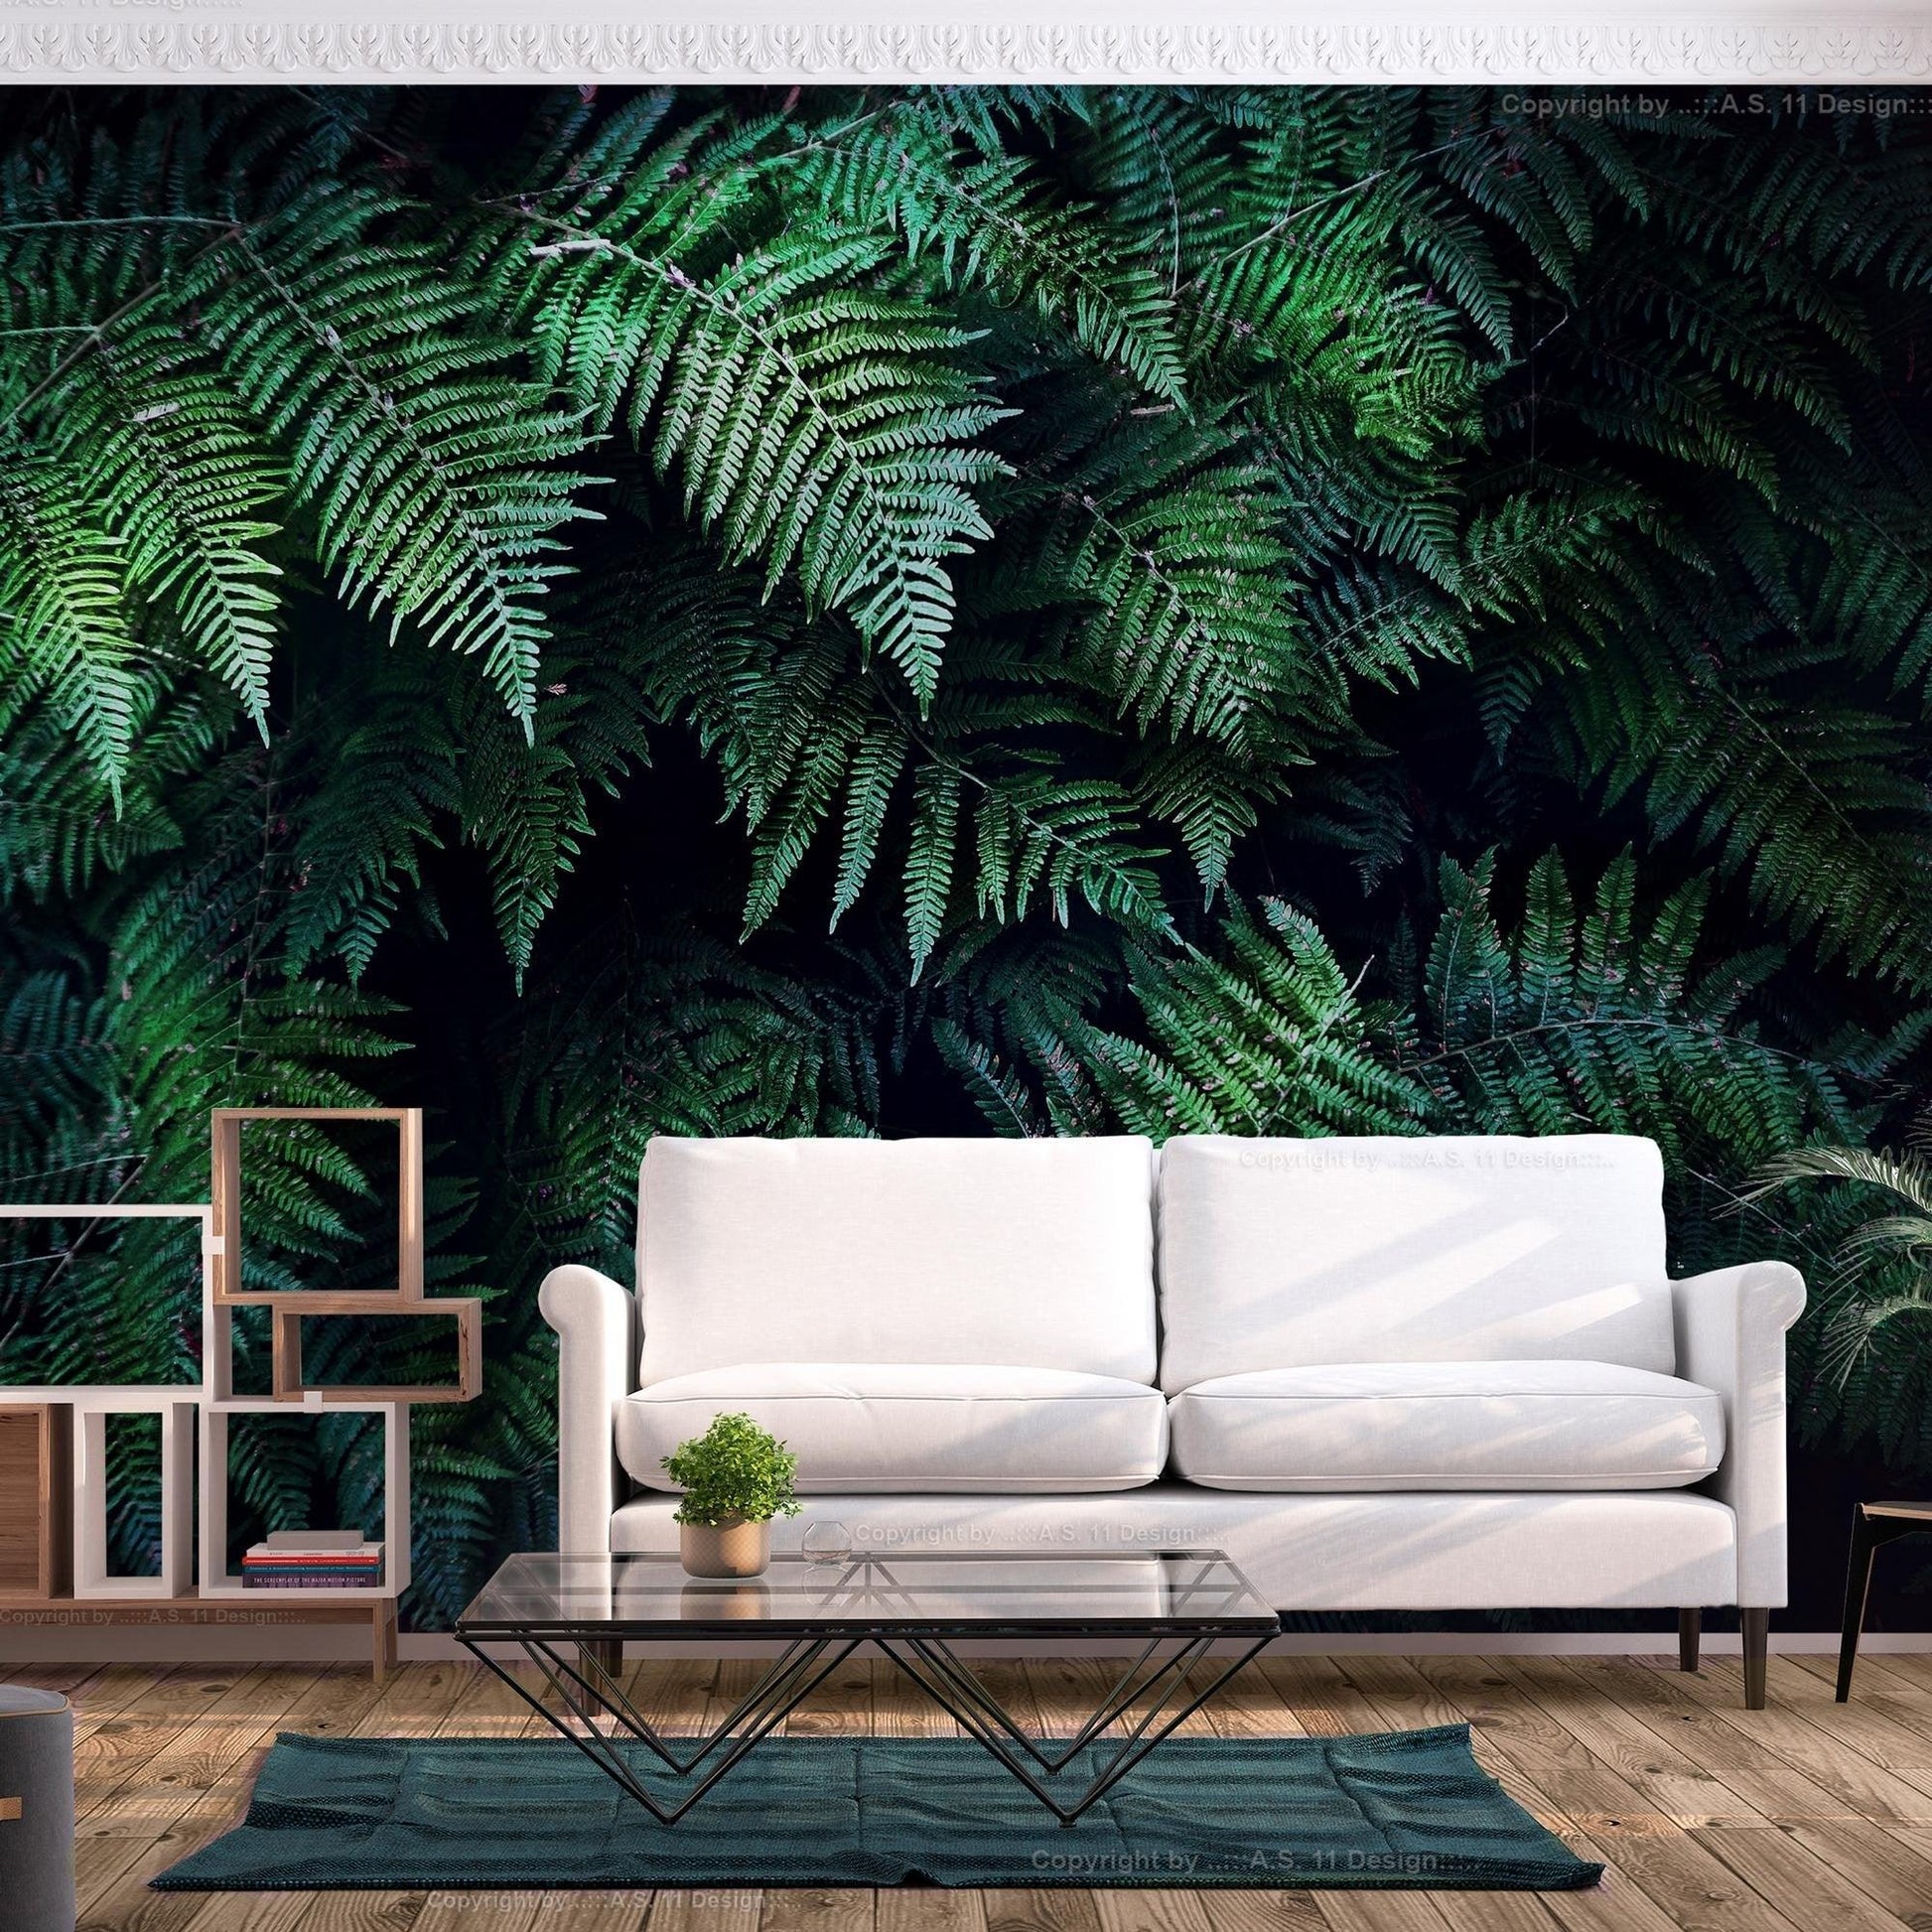 Peel and stick wall mural - In the Thicket - www.trendingbestsellers.com